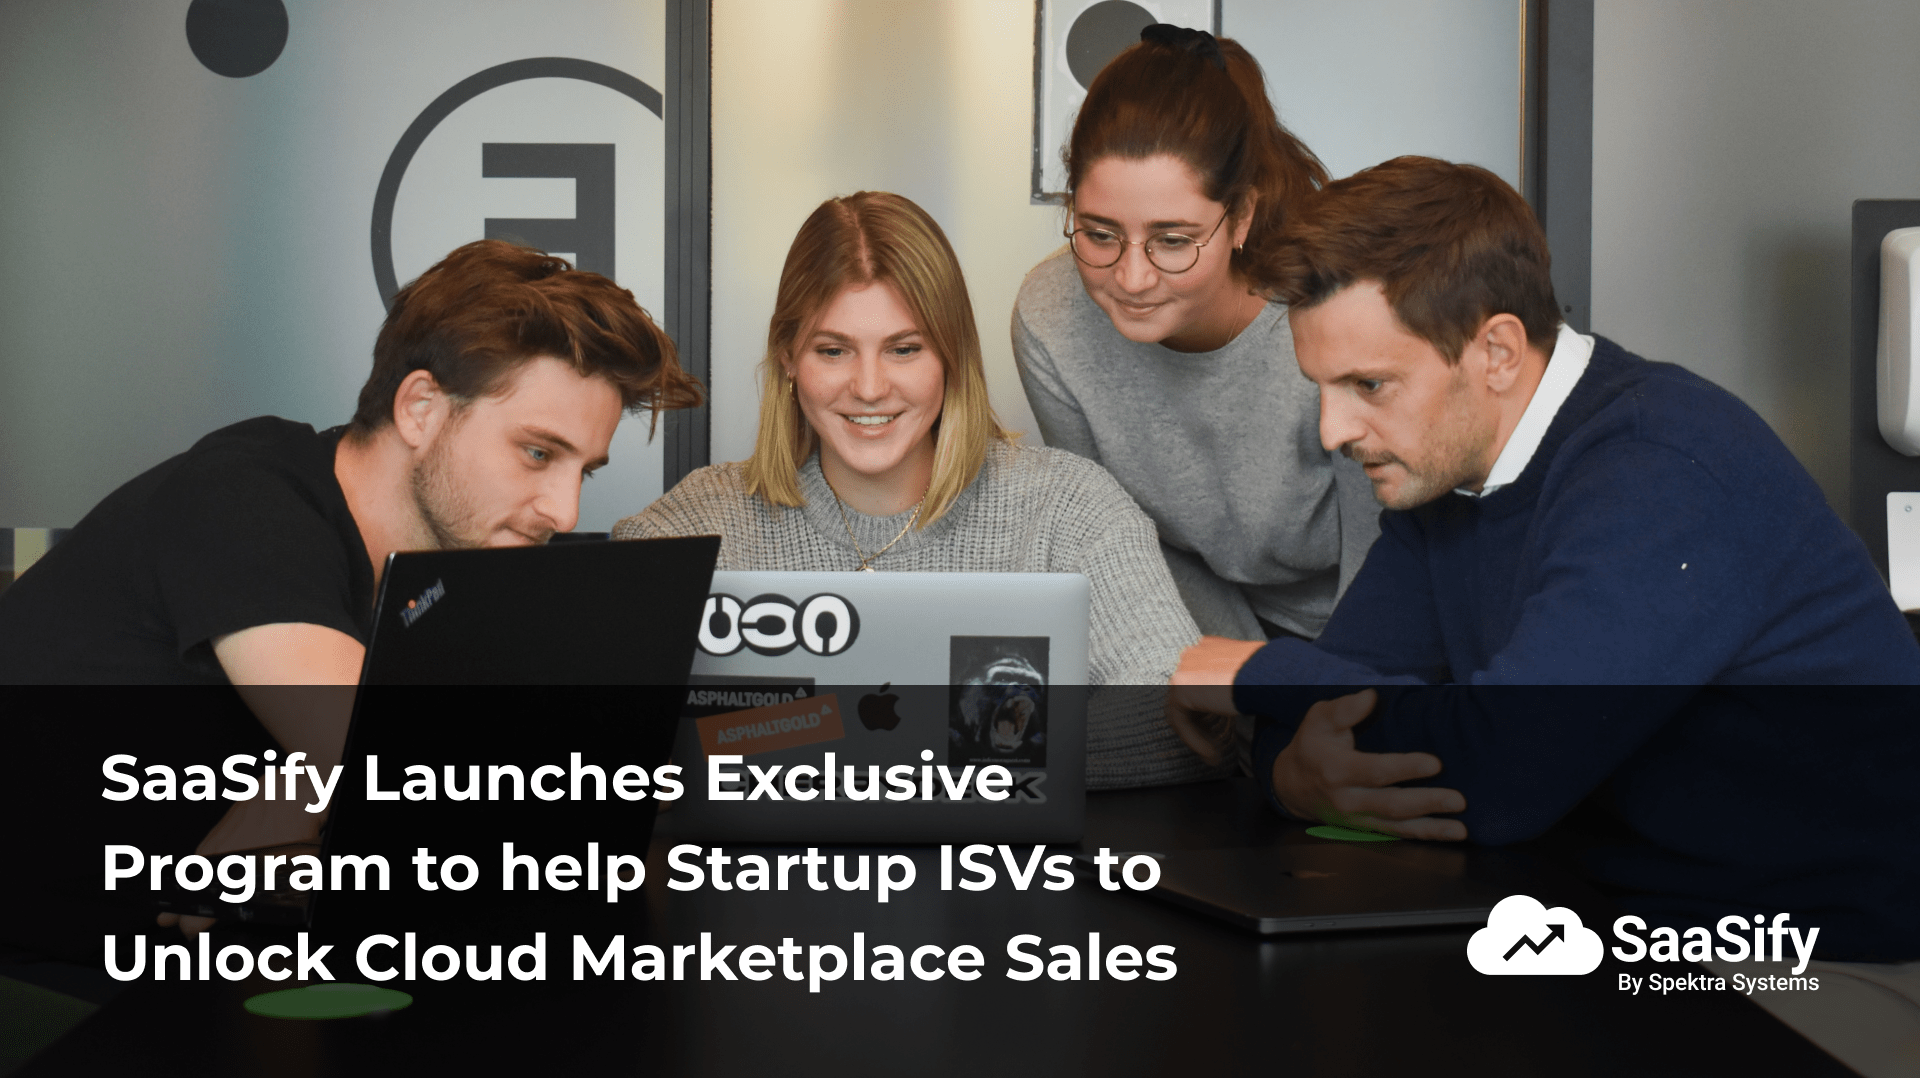 SaaSify Launches Exclusive Program to help Startup ISVs to Unlock Cloud Marketplace Sales min